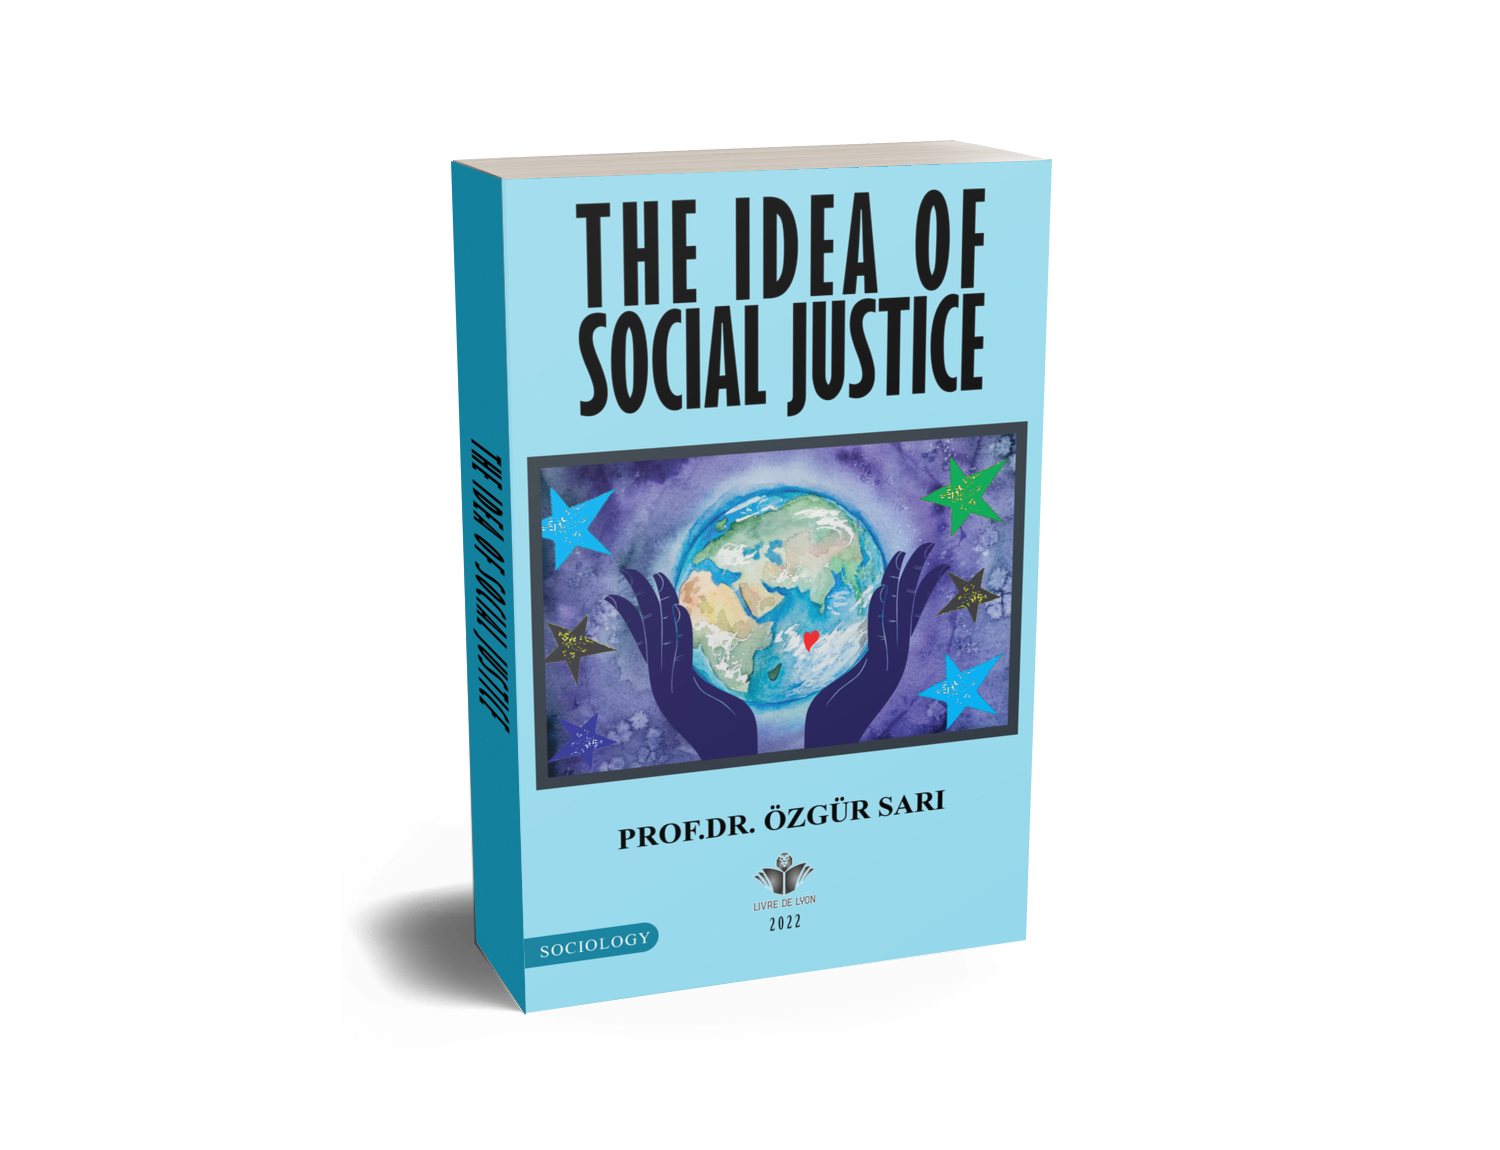 The Idea of Social Justice